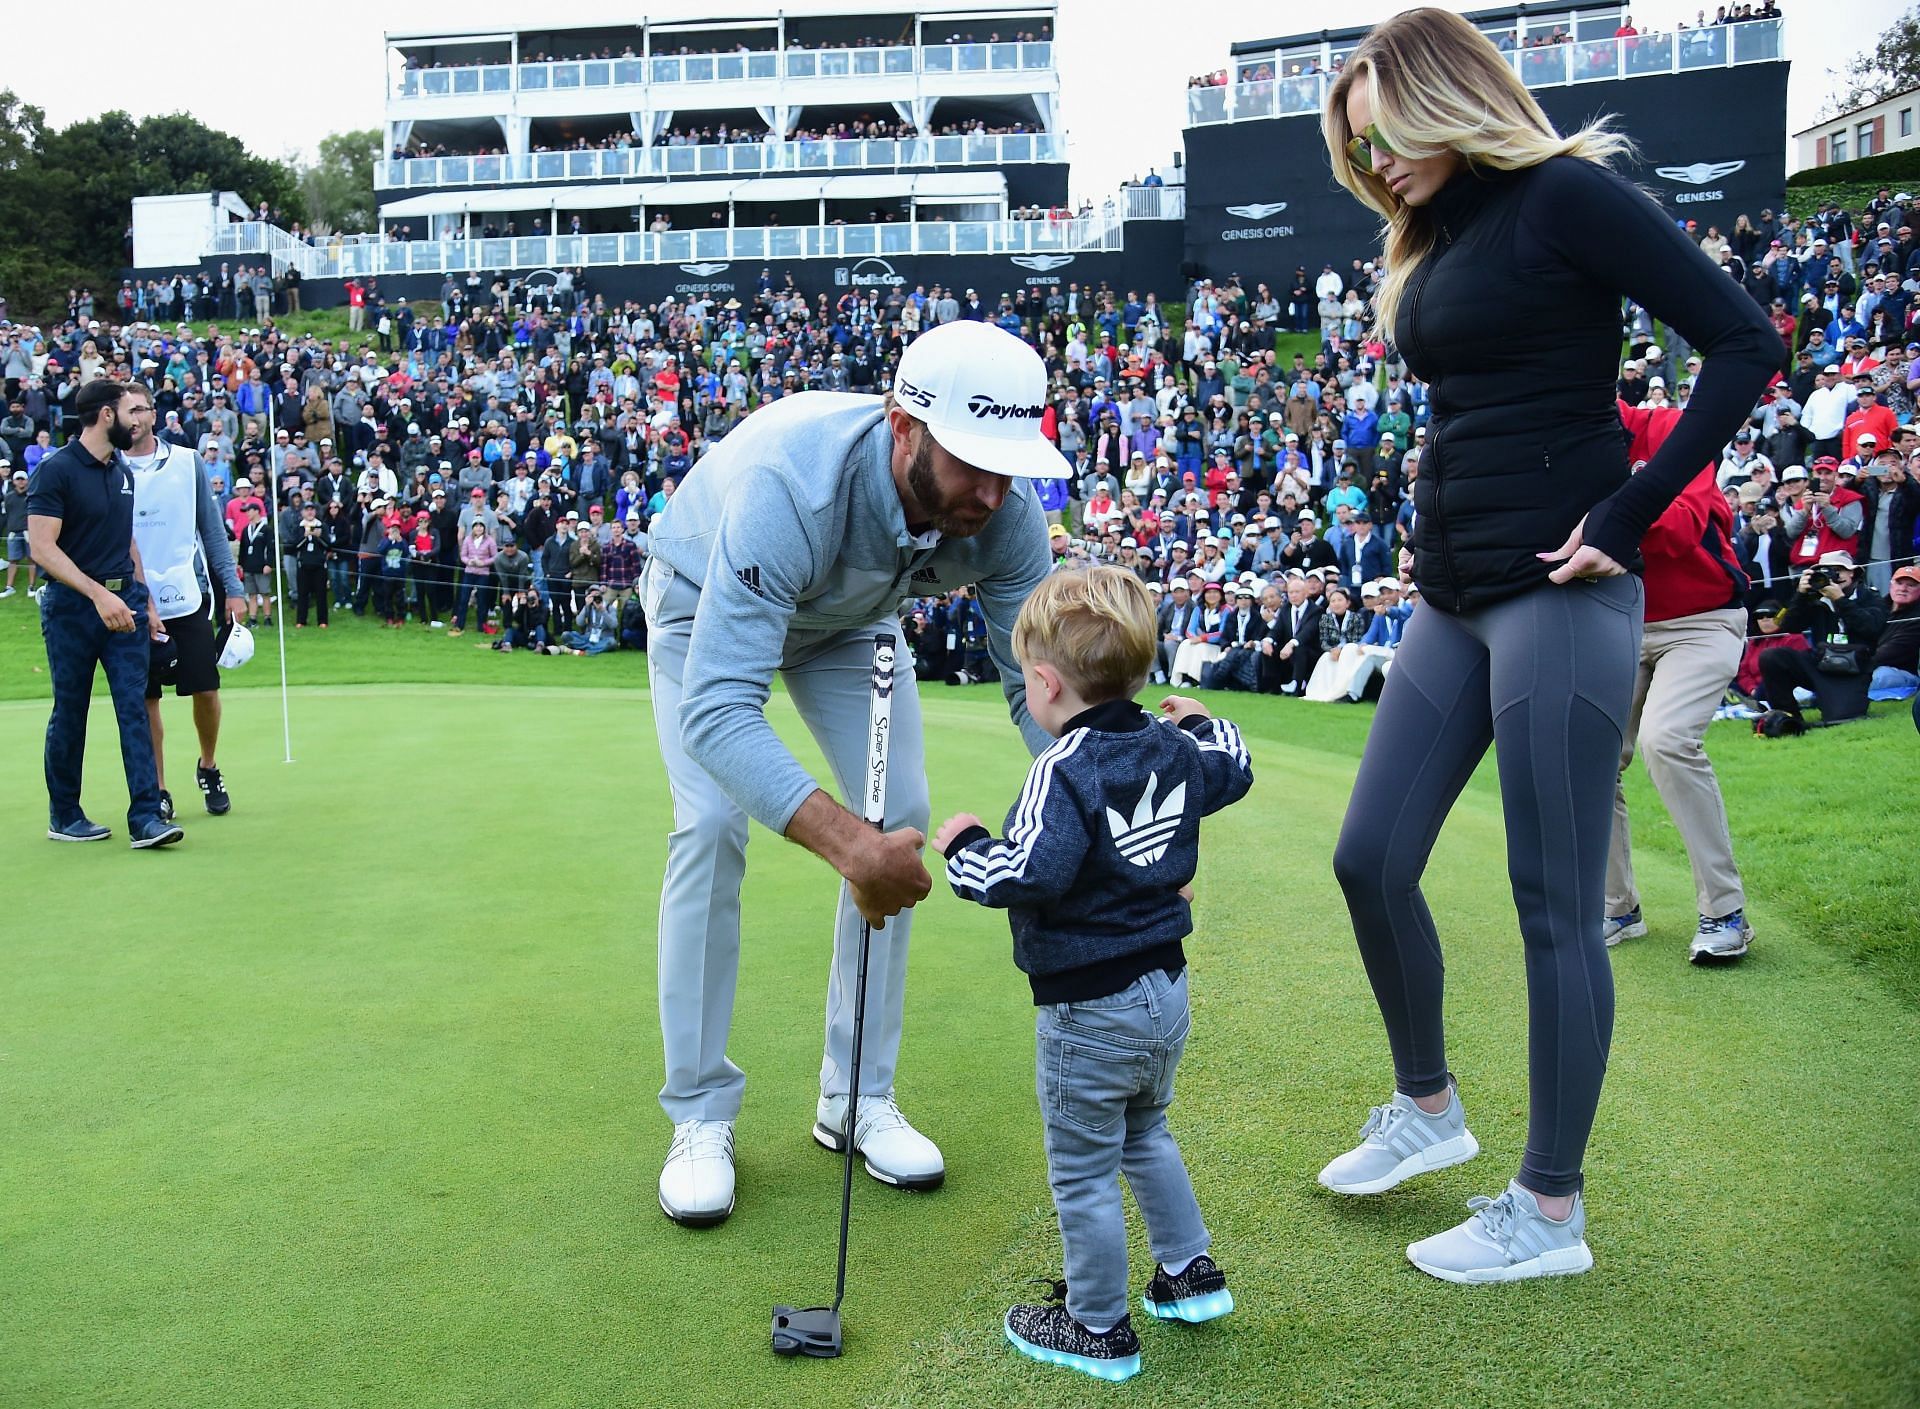 Dustin Johnson, wife Paulina Gretzky and son Tatum at the Genesis Open - Final Round